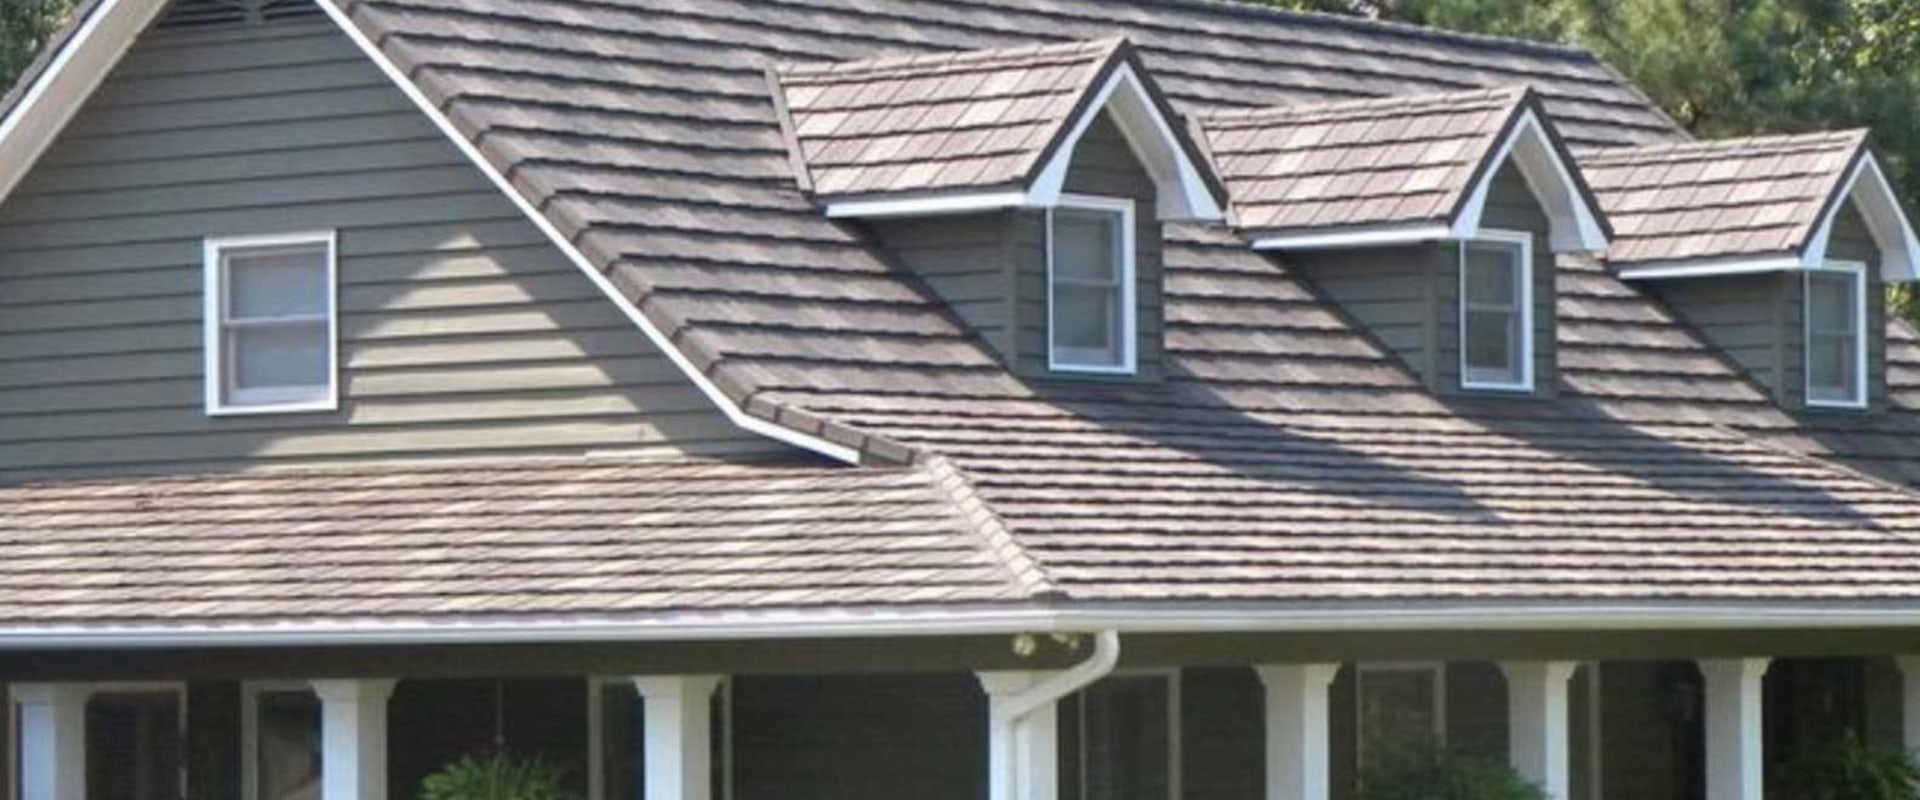 How is roofing made?